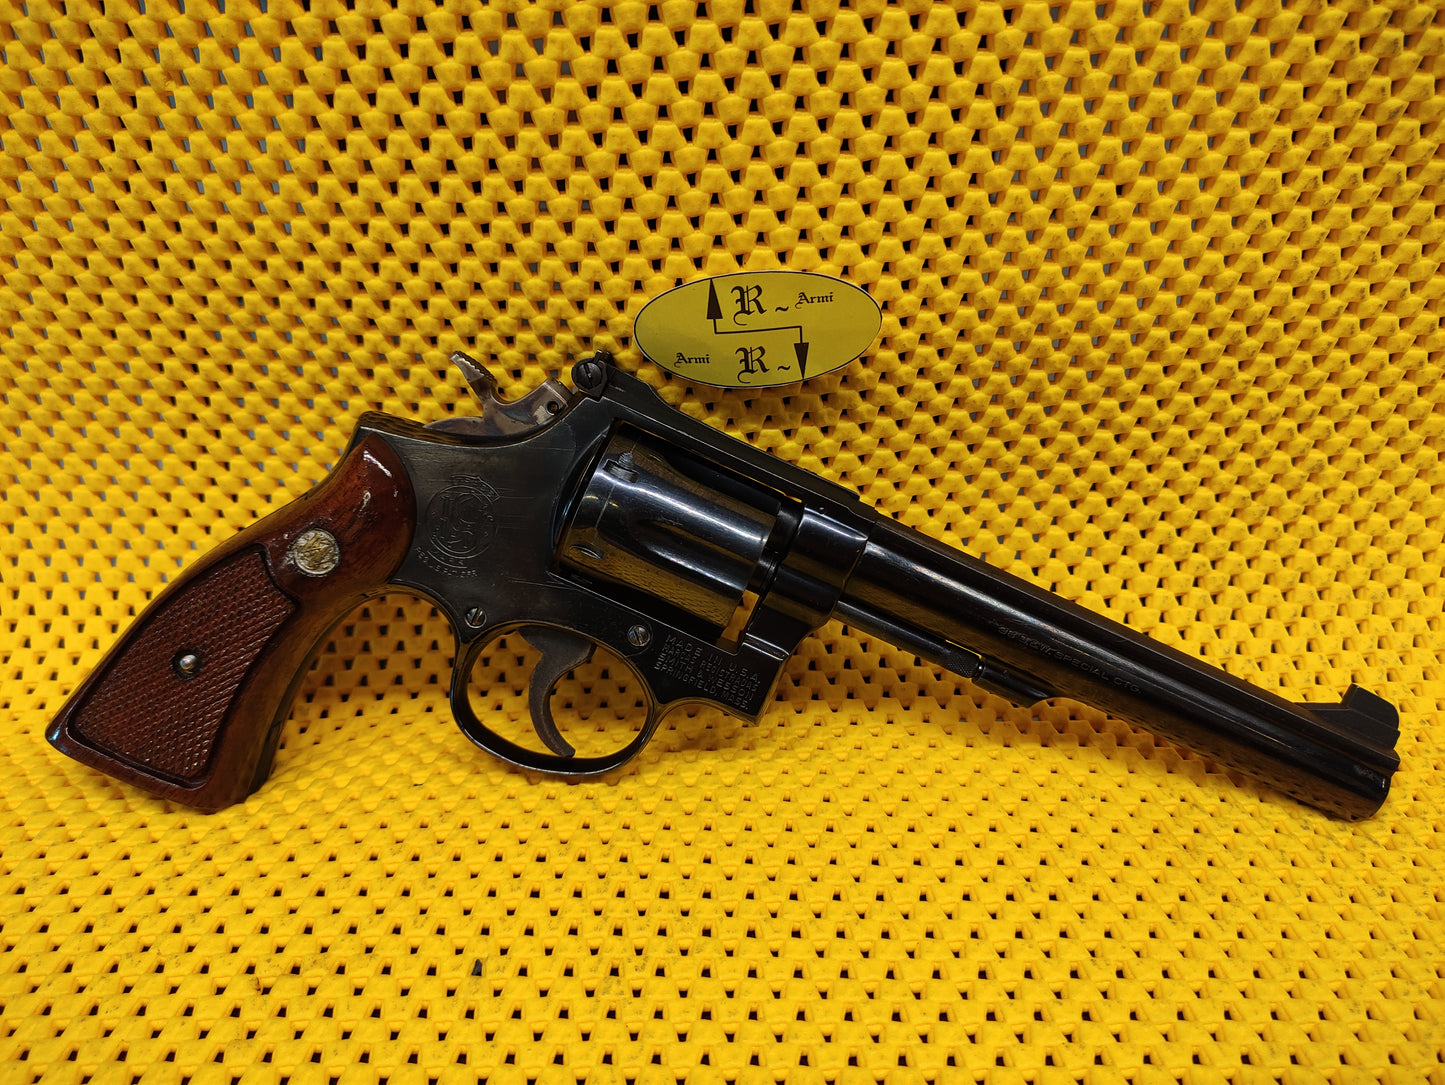 SMITH & WESSON 14-3